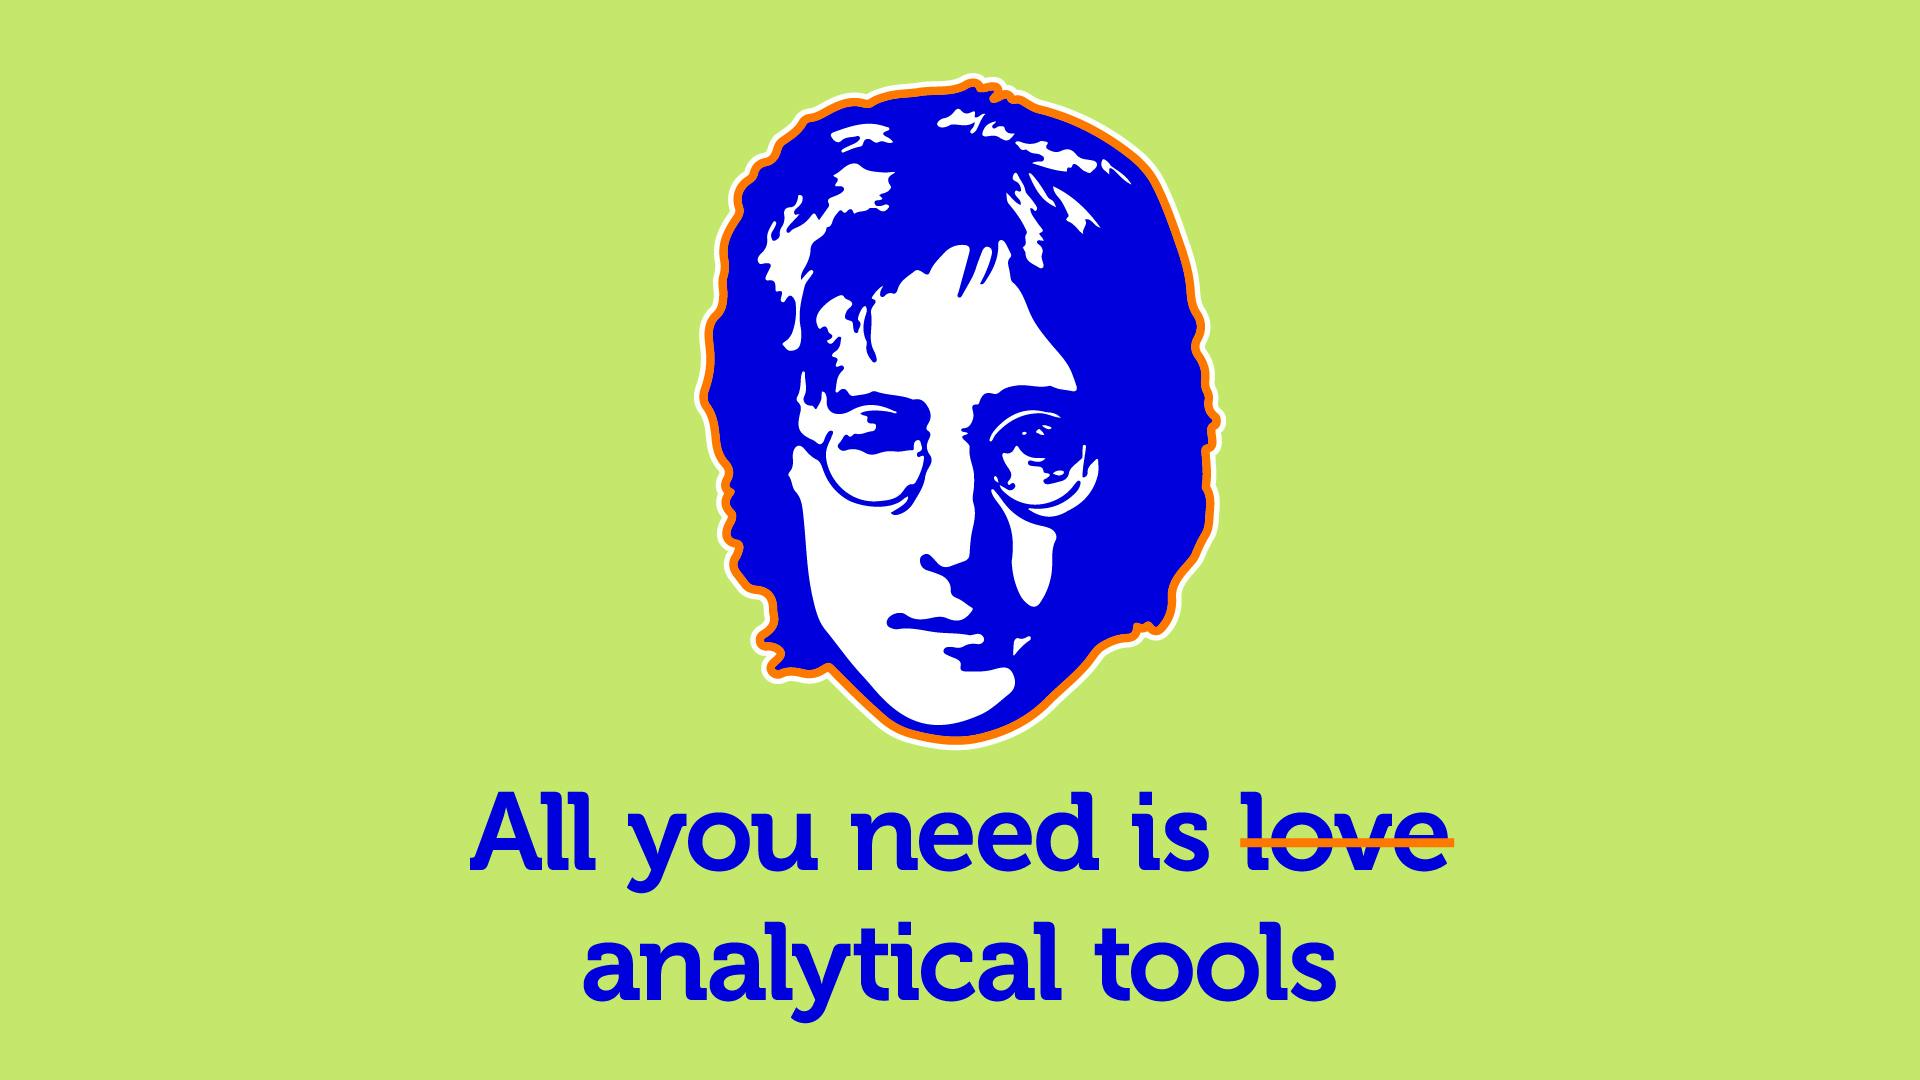 Analytical tools